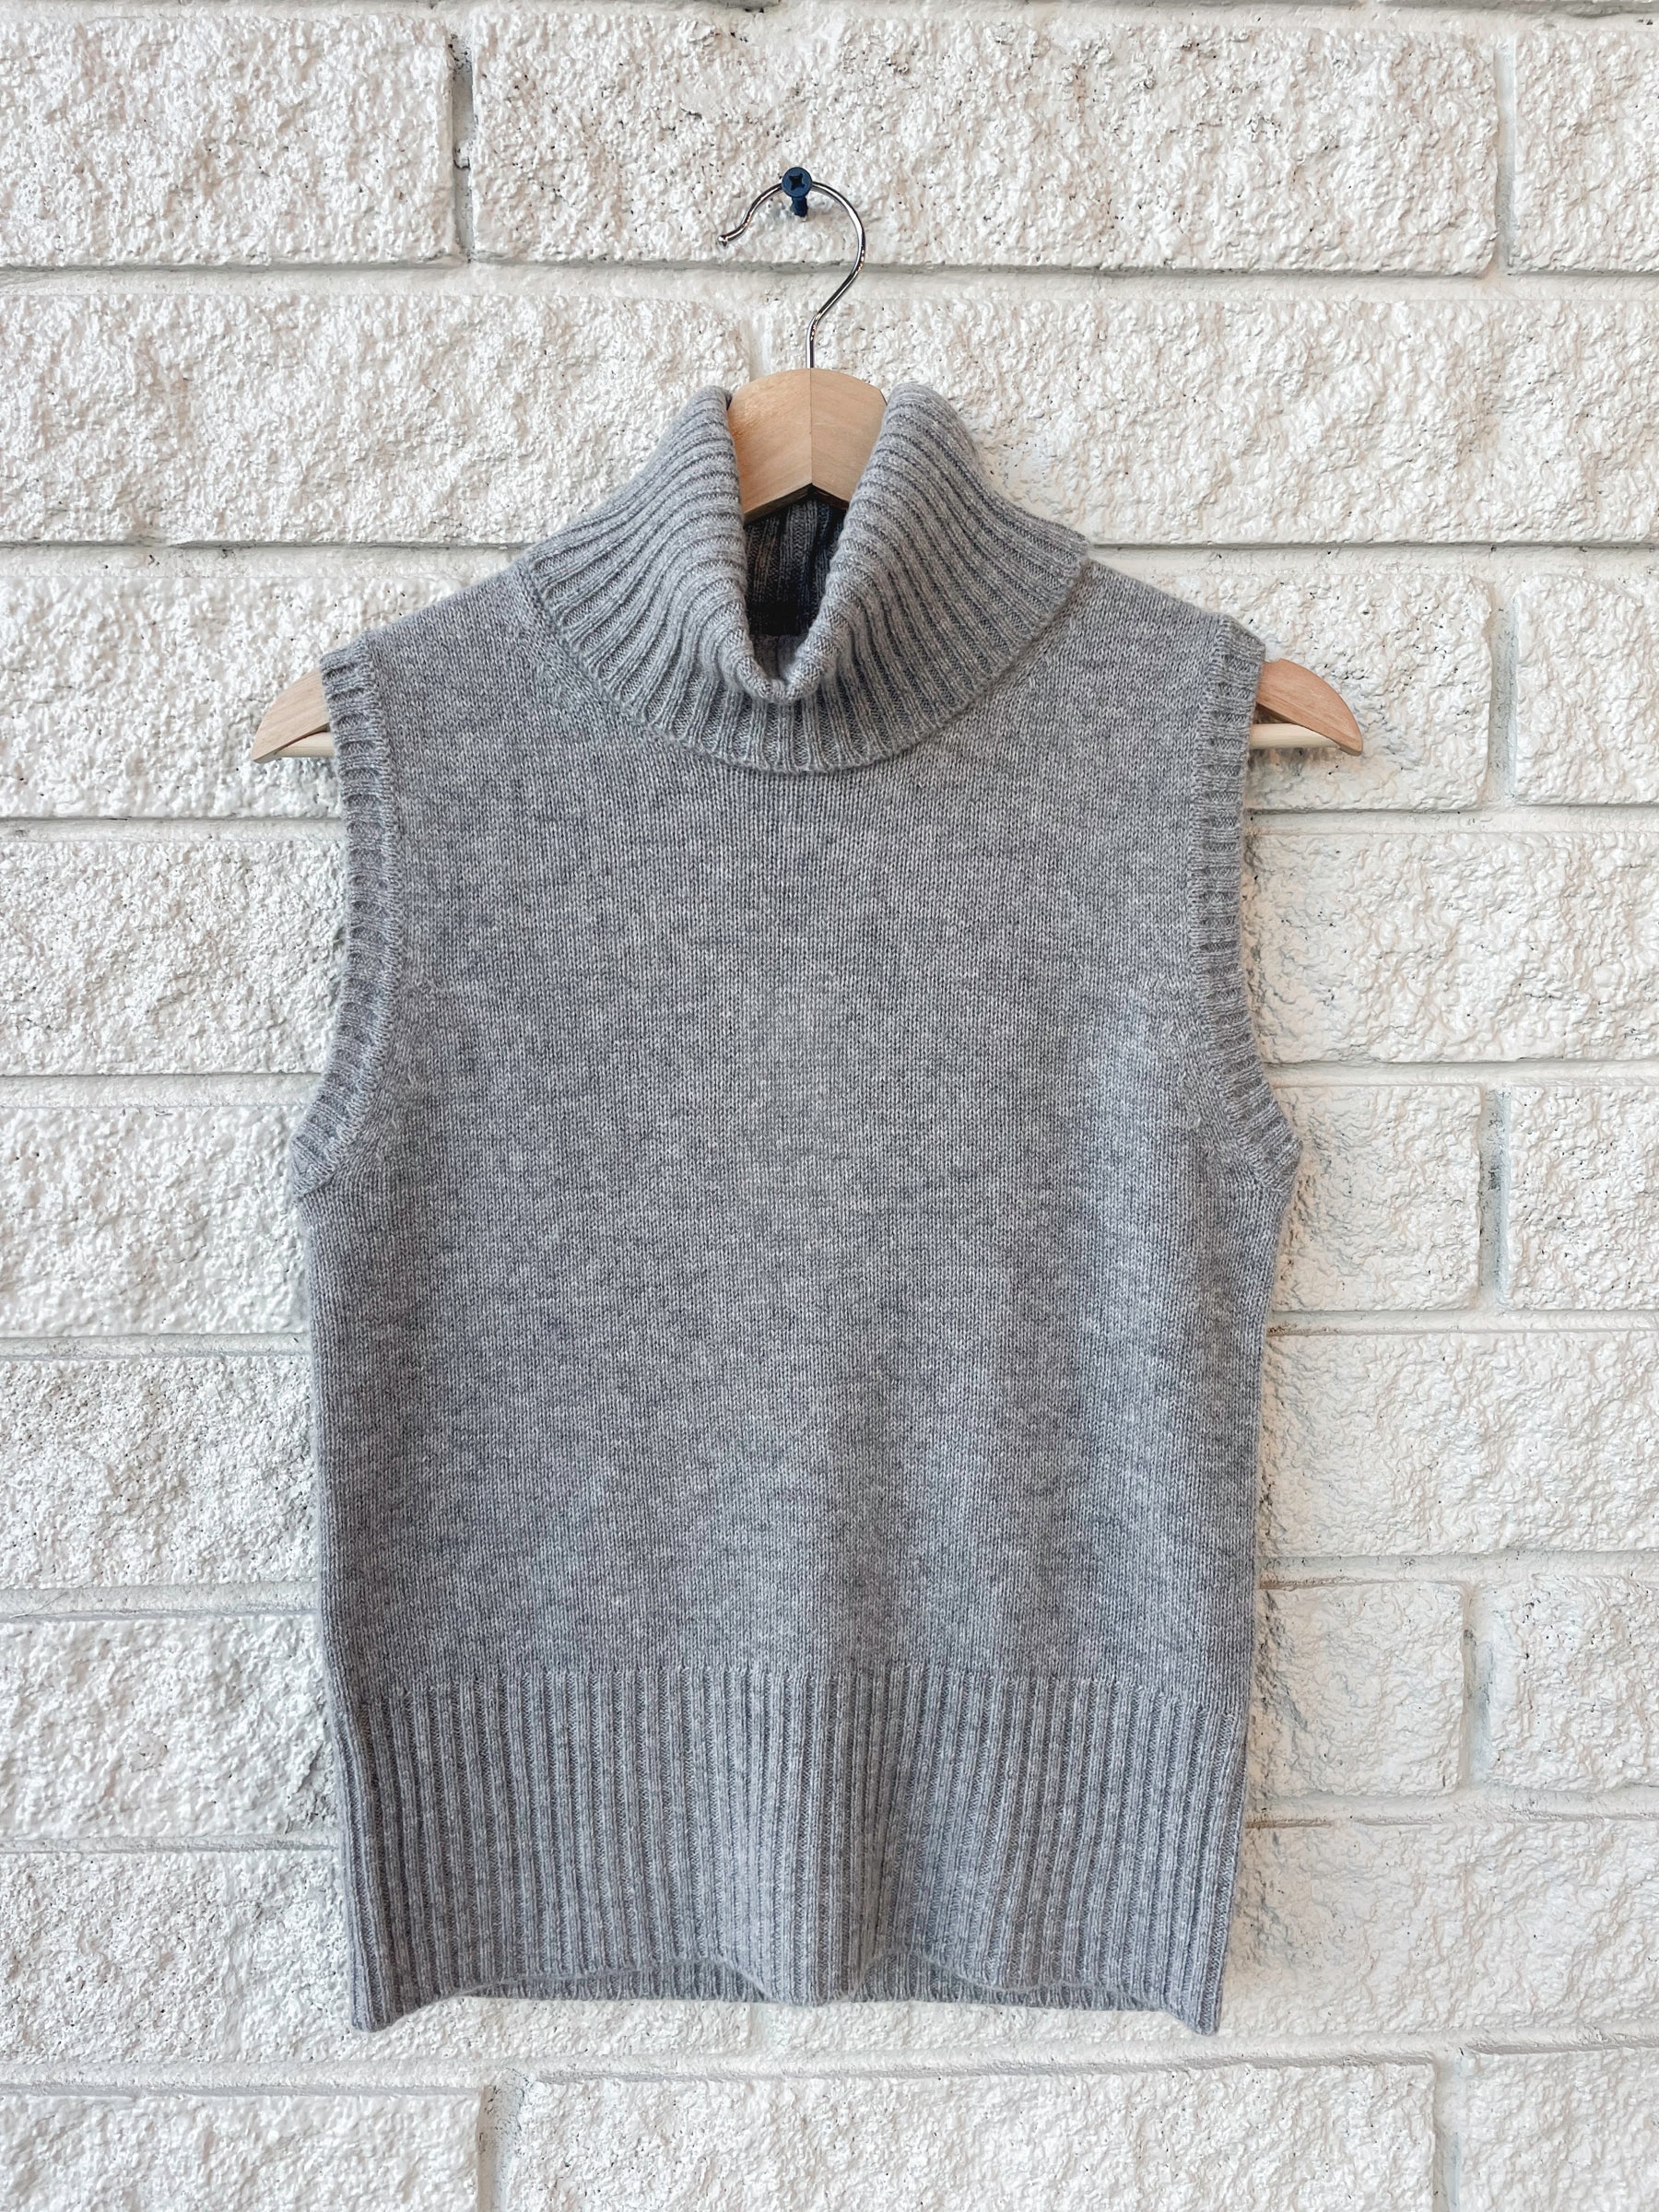 Mazzy Cashmere Shell